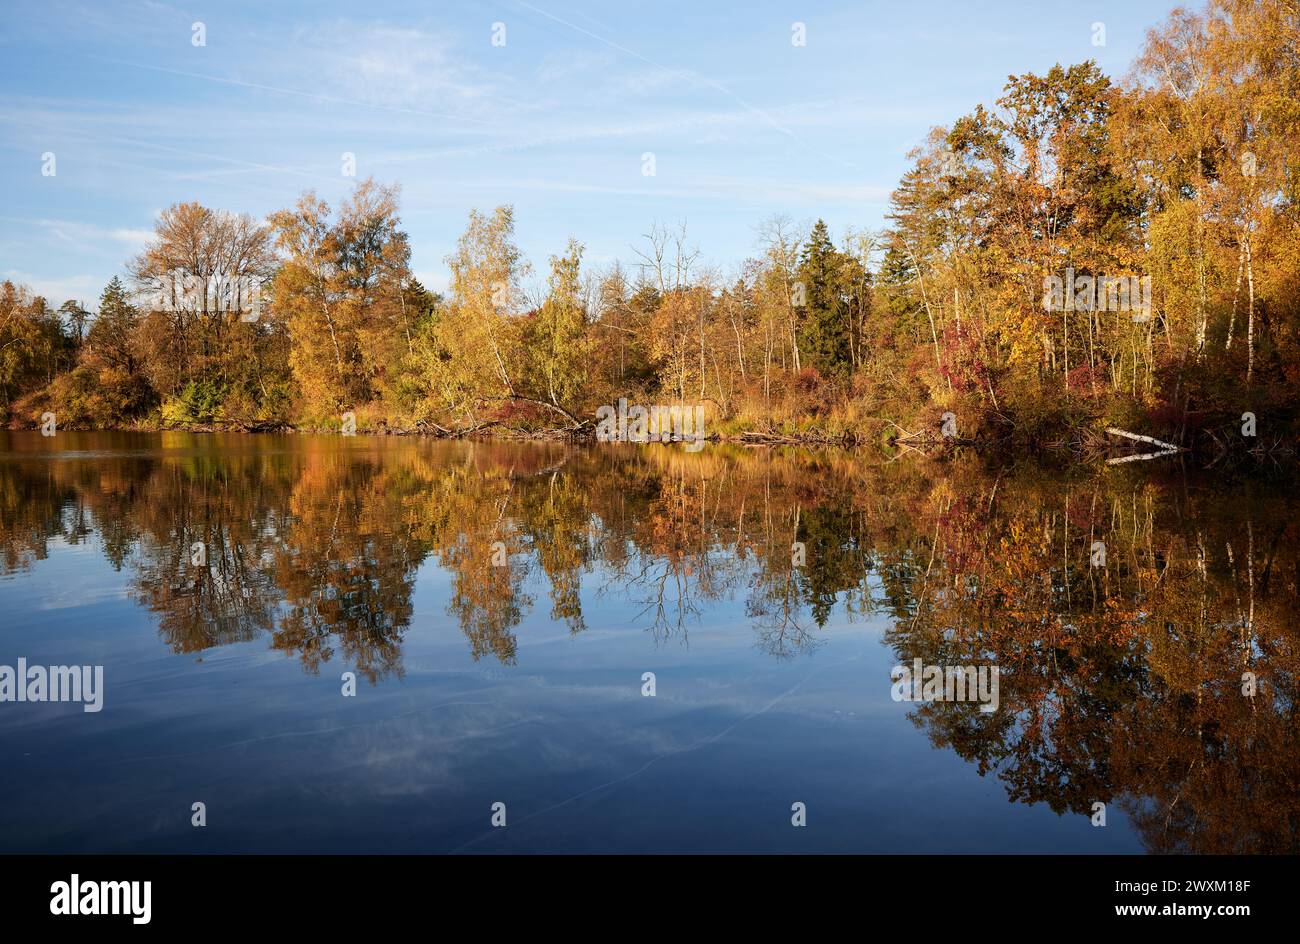 A serene lake with trees mirrored in calm waters Stock Photo